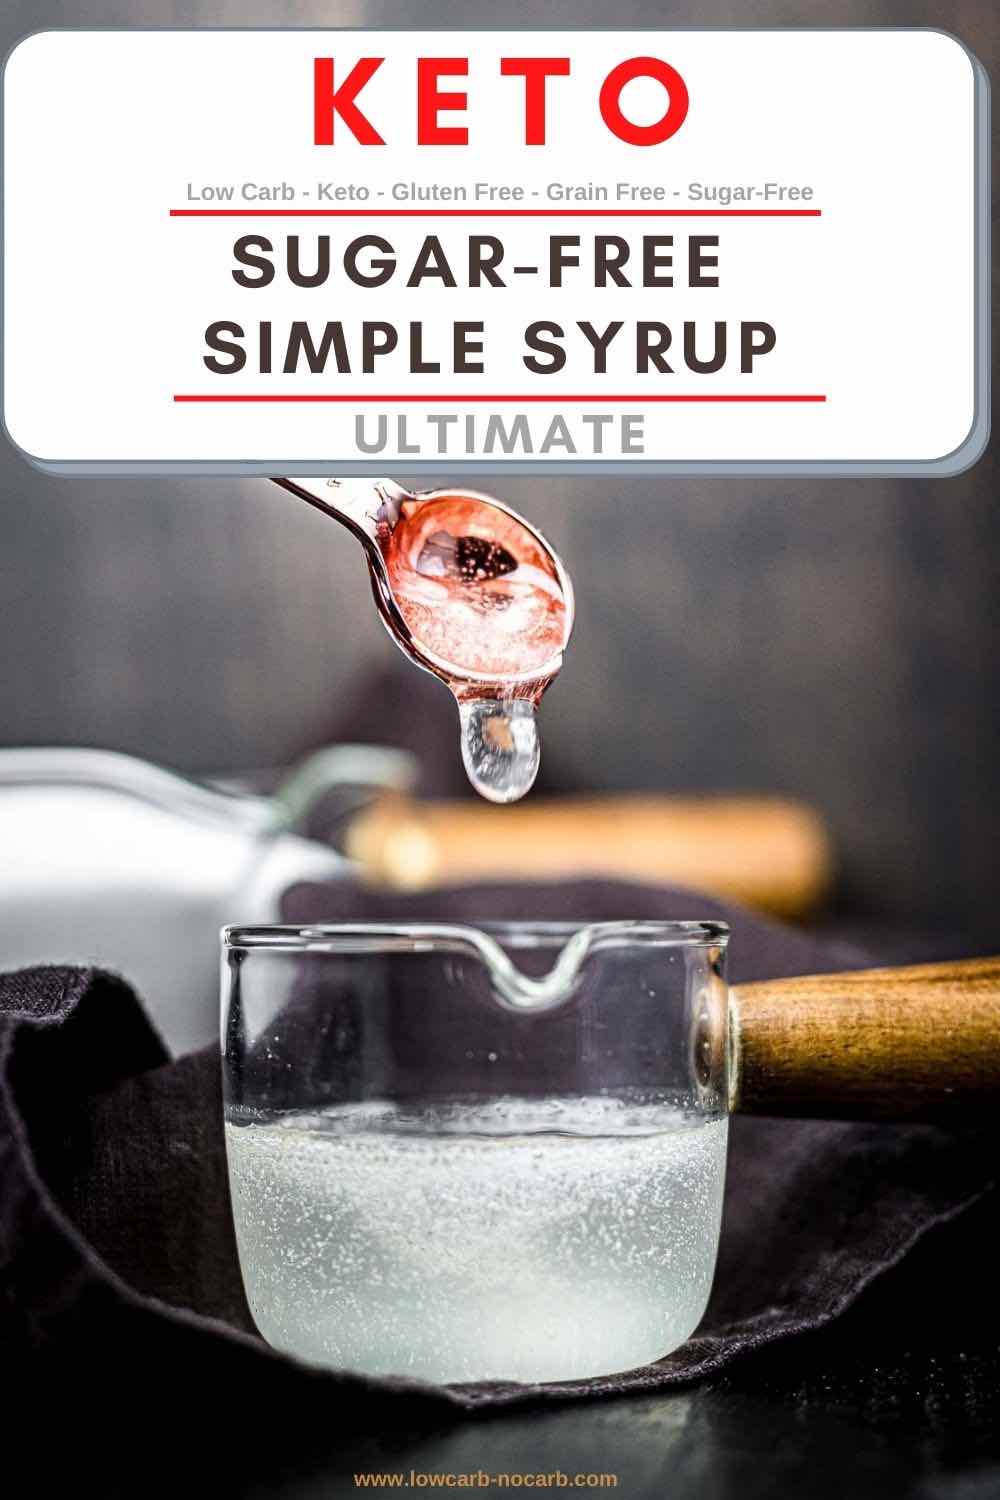 Low Carb Syrup dripping into the glass jar